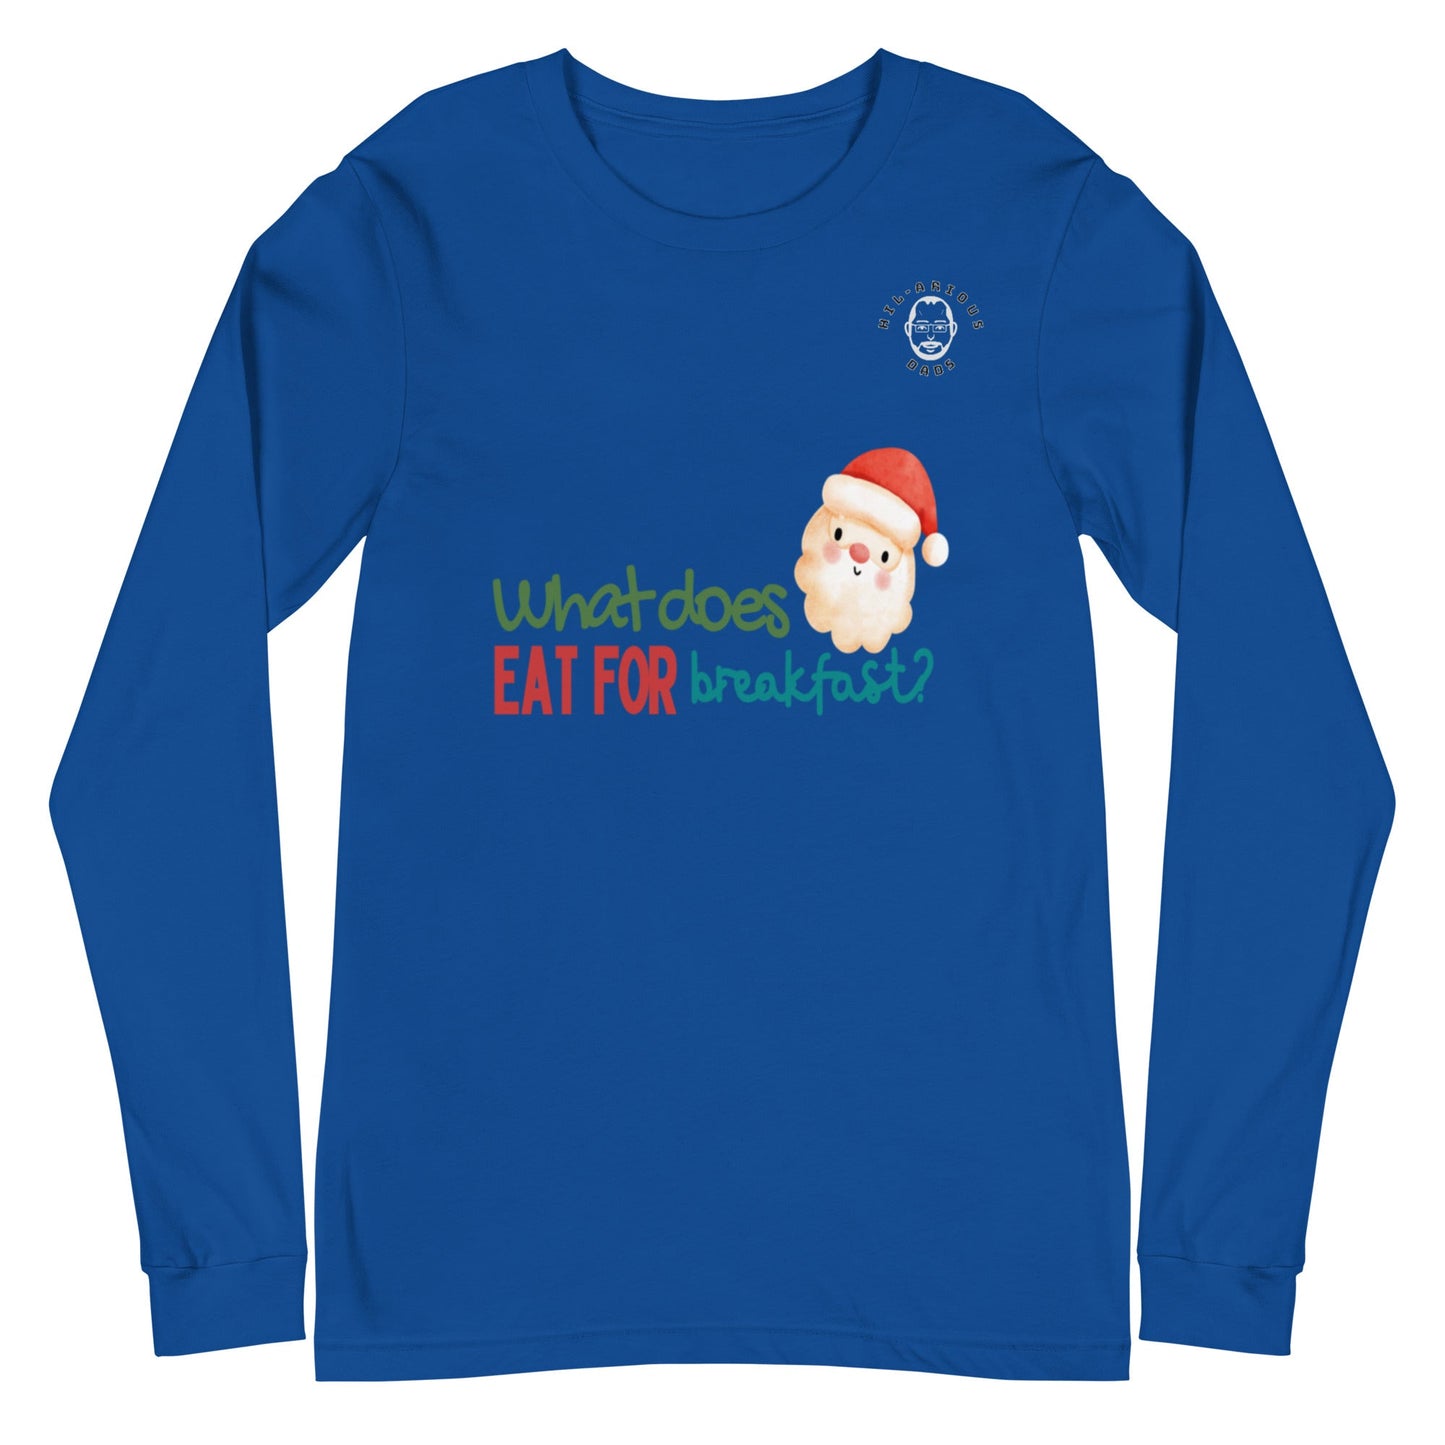 What does Santa eat for breakfast?-Long Sleeve Tee - Hil-arious Dads